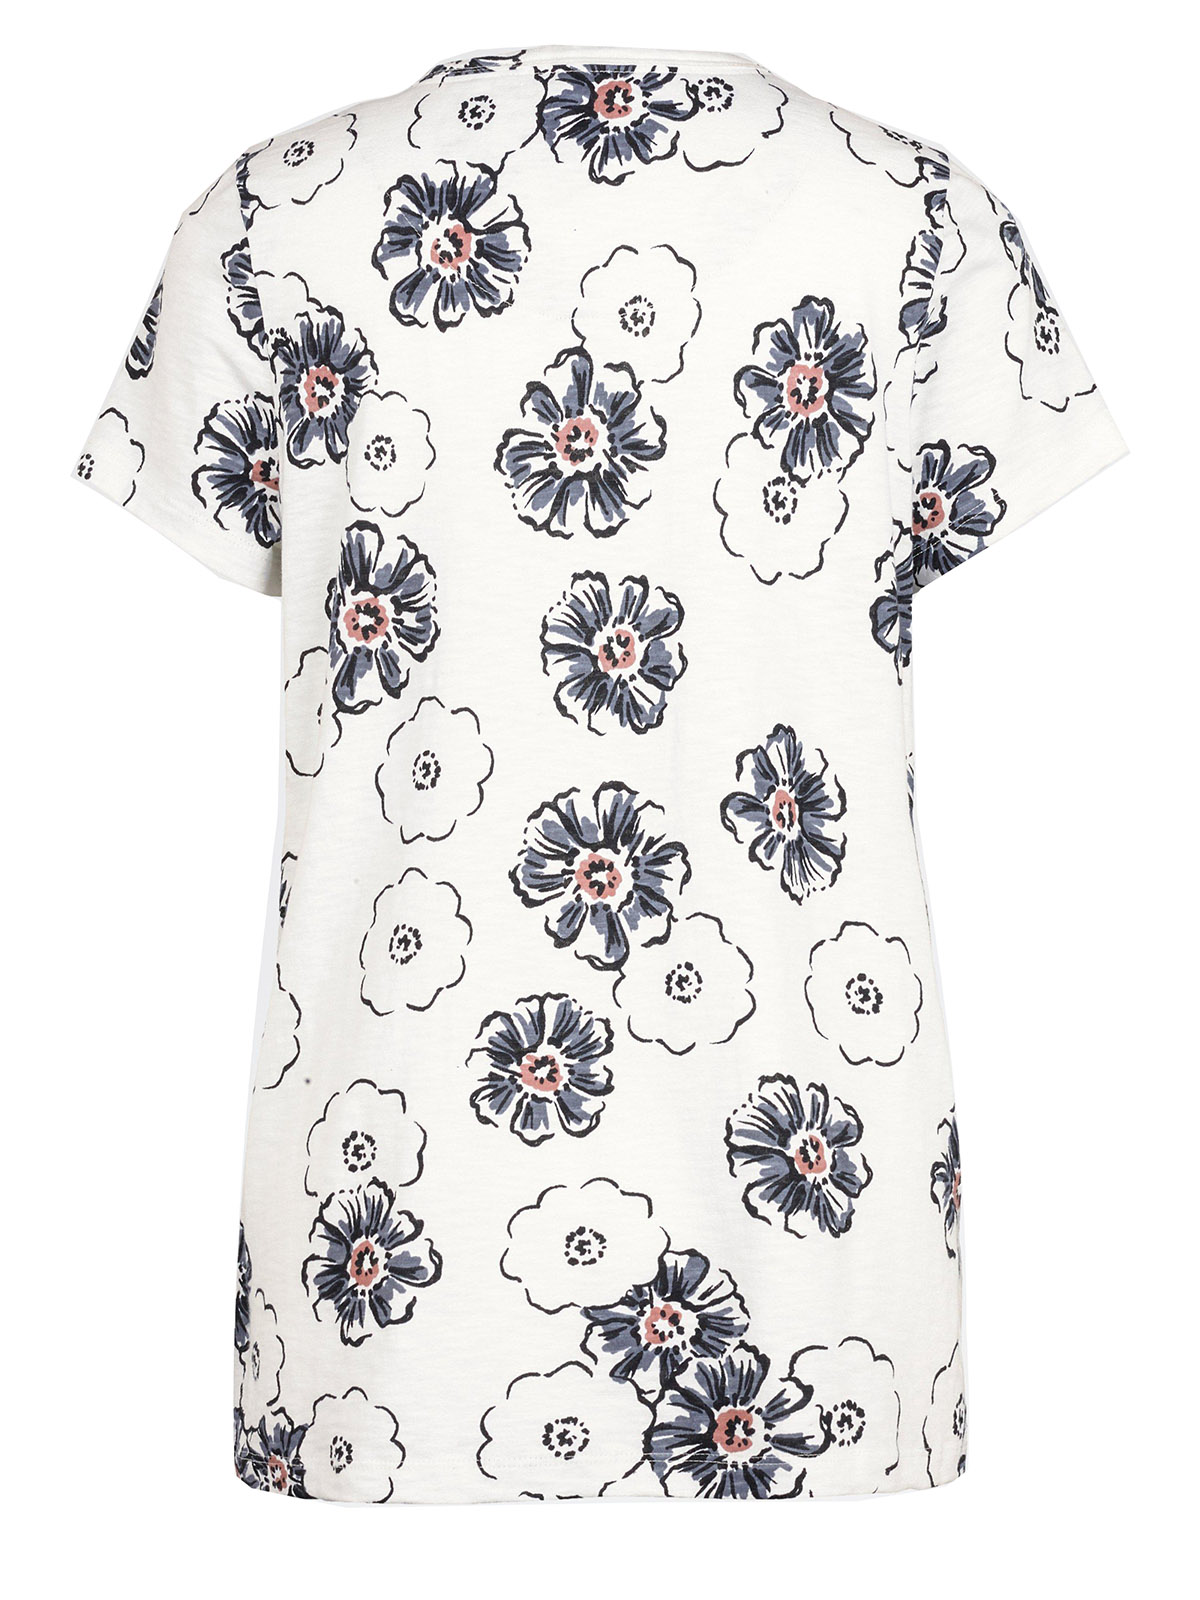 FAT FACE - - Fat Face WHITE Pure Cotton Floral Print Top - Size 14 to 18